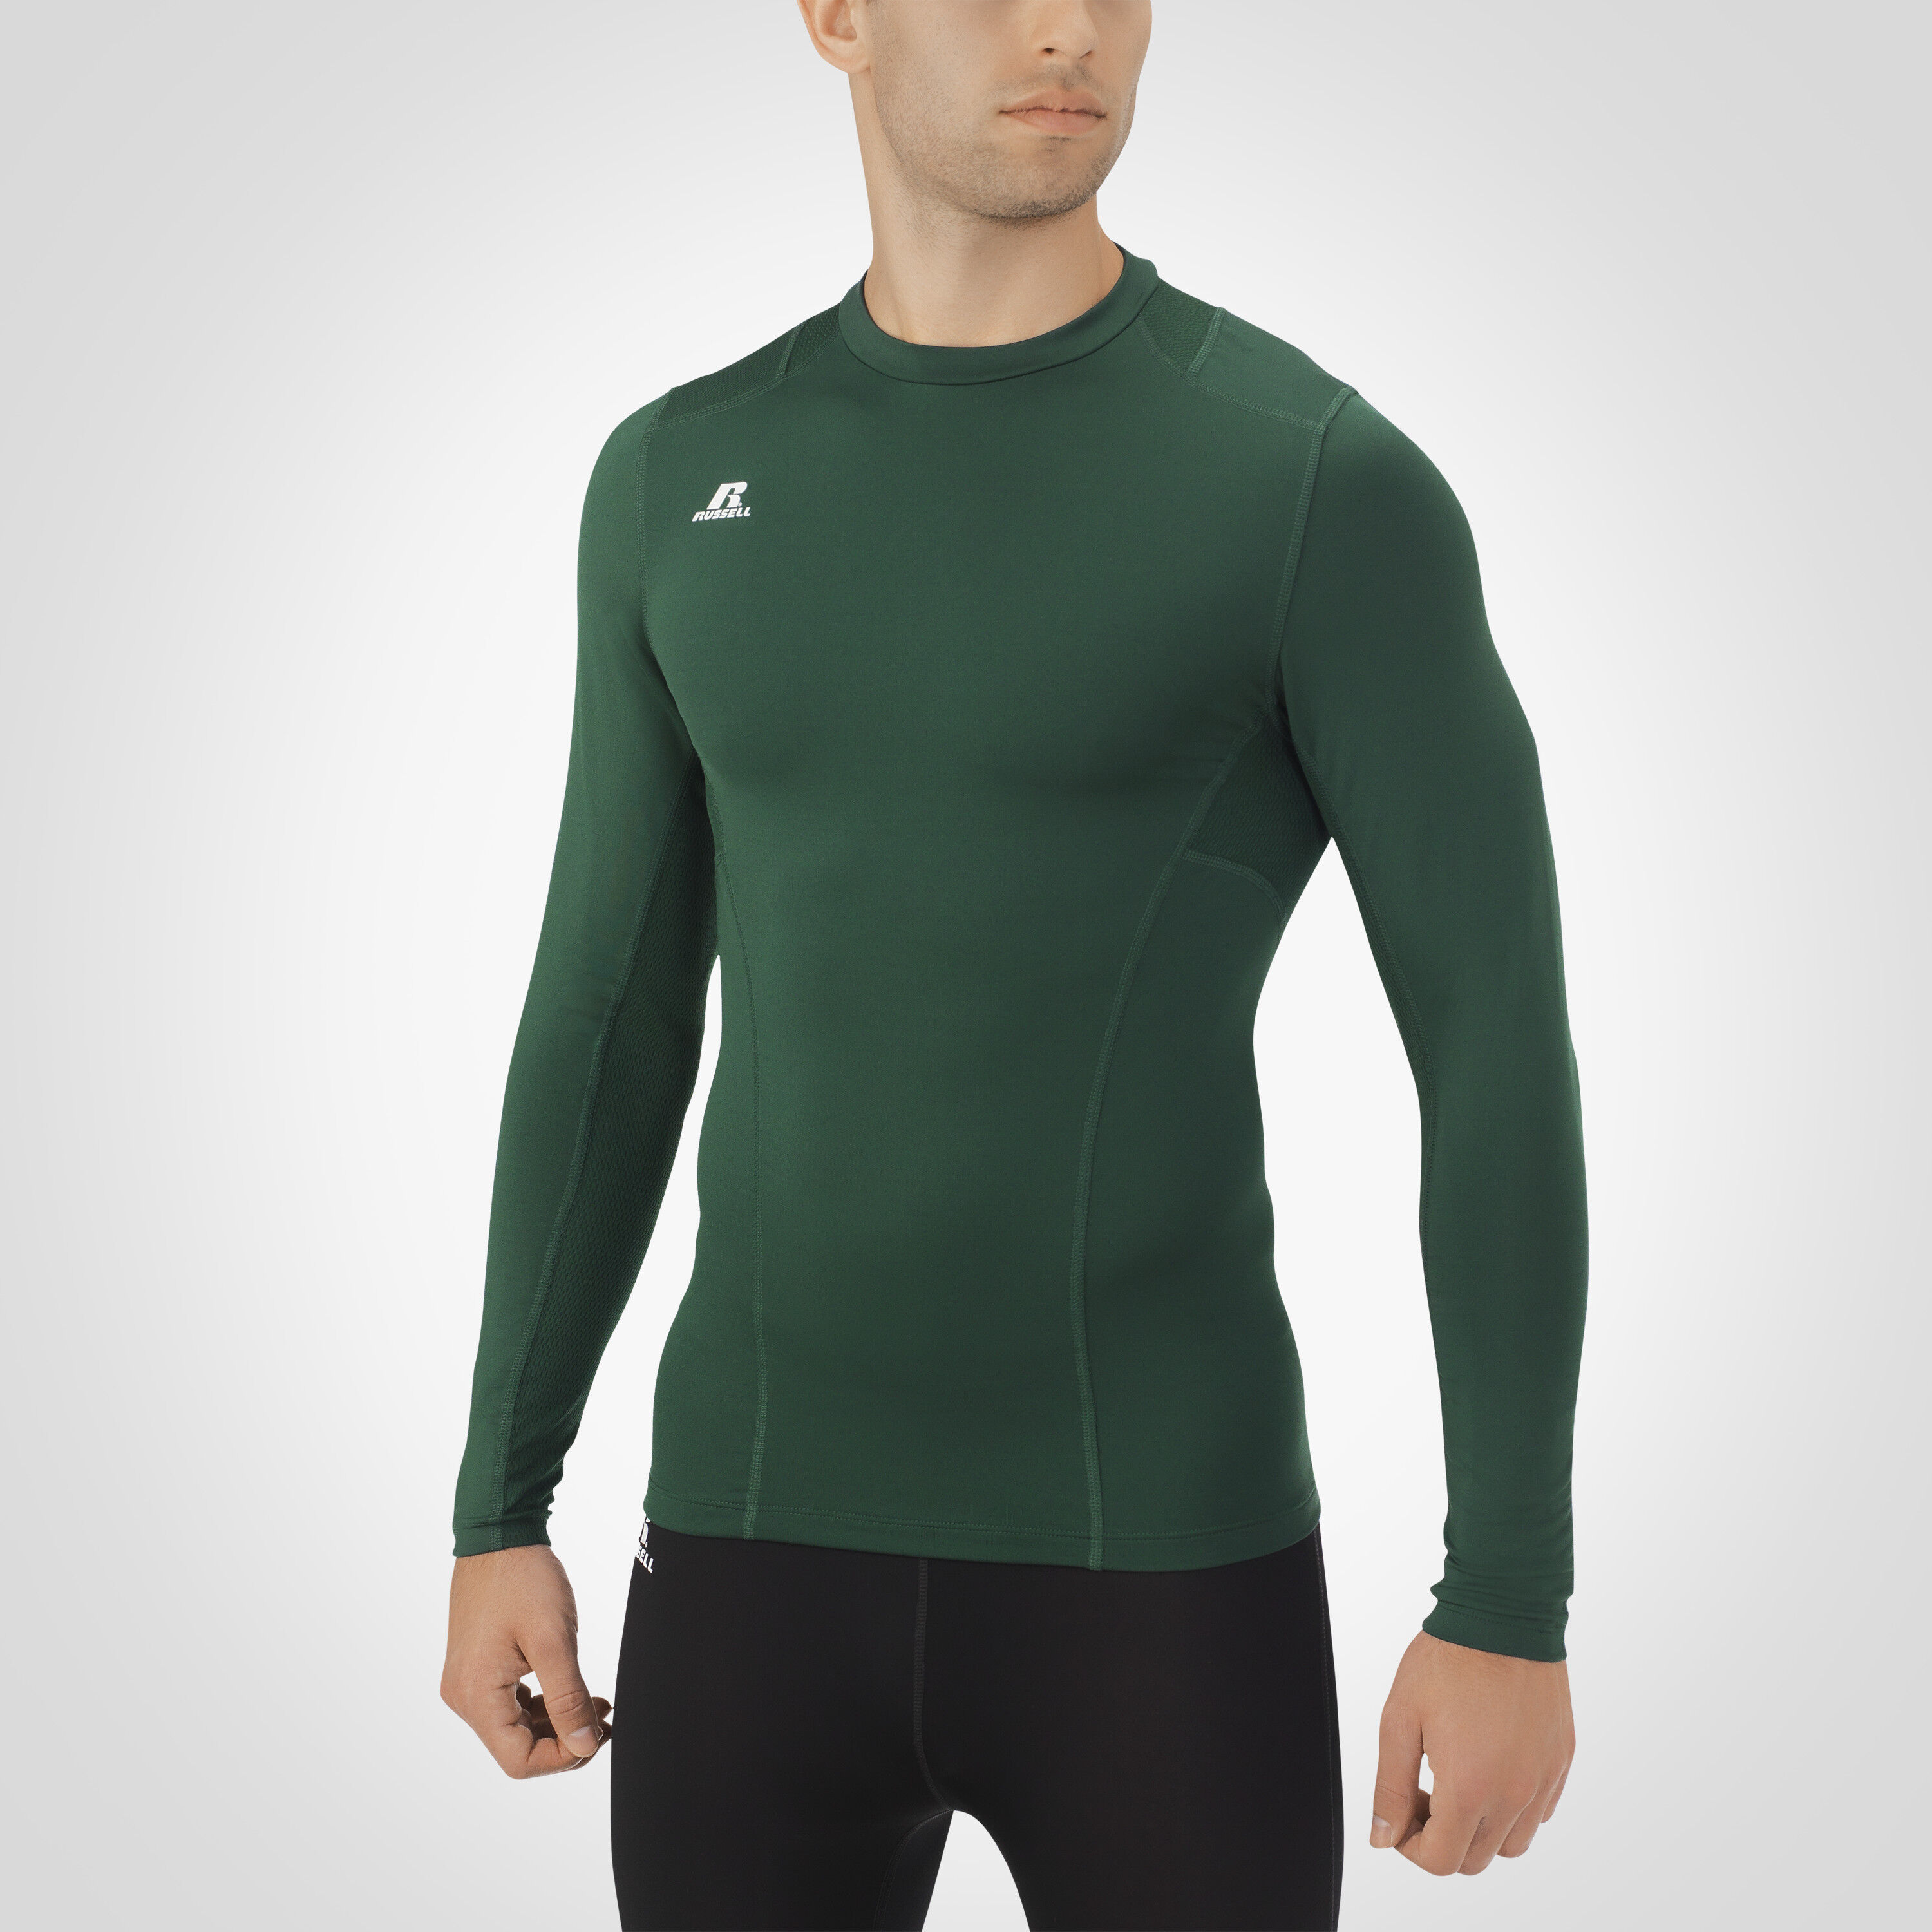 Details about   Jako Sports Training Football Soccer Mens Compression Long Sleeve Top Crew Neck 